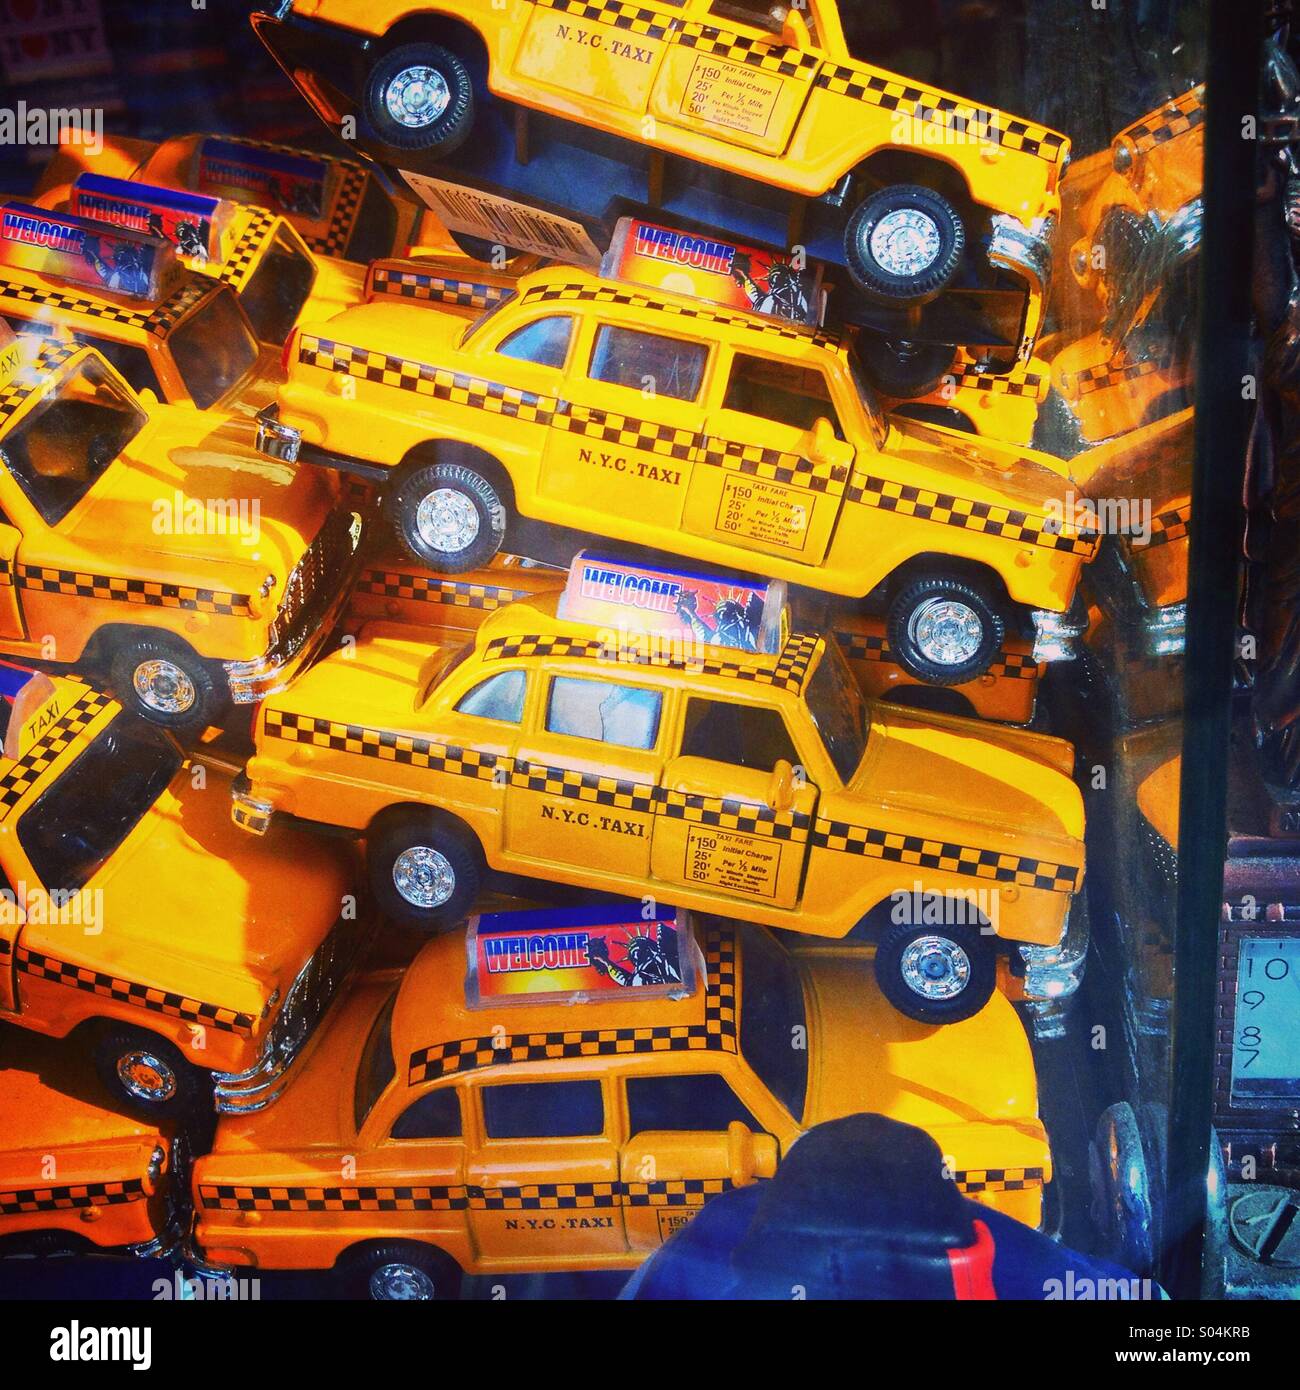 Toy cars modelled on New York city yellow taxis Stock Photo